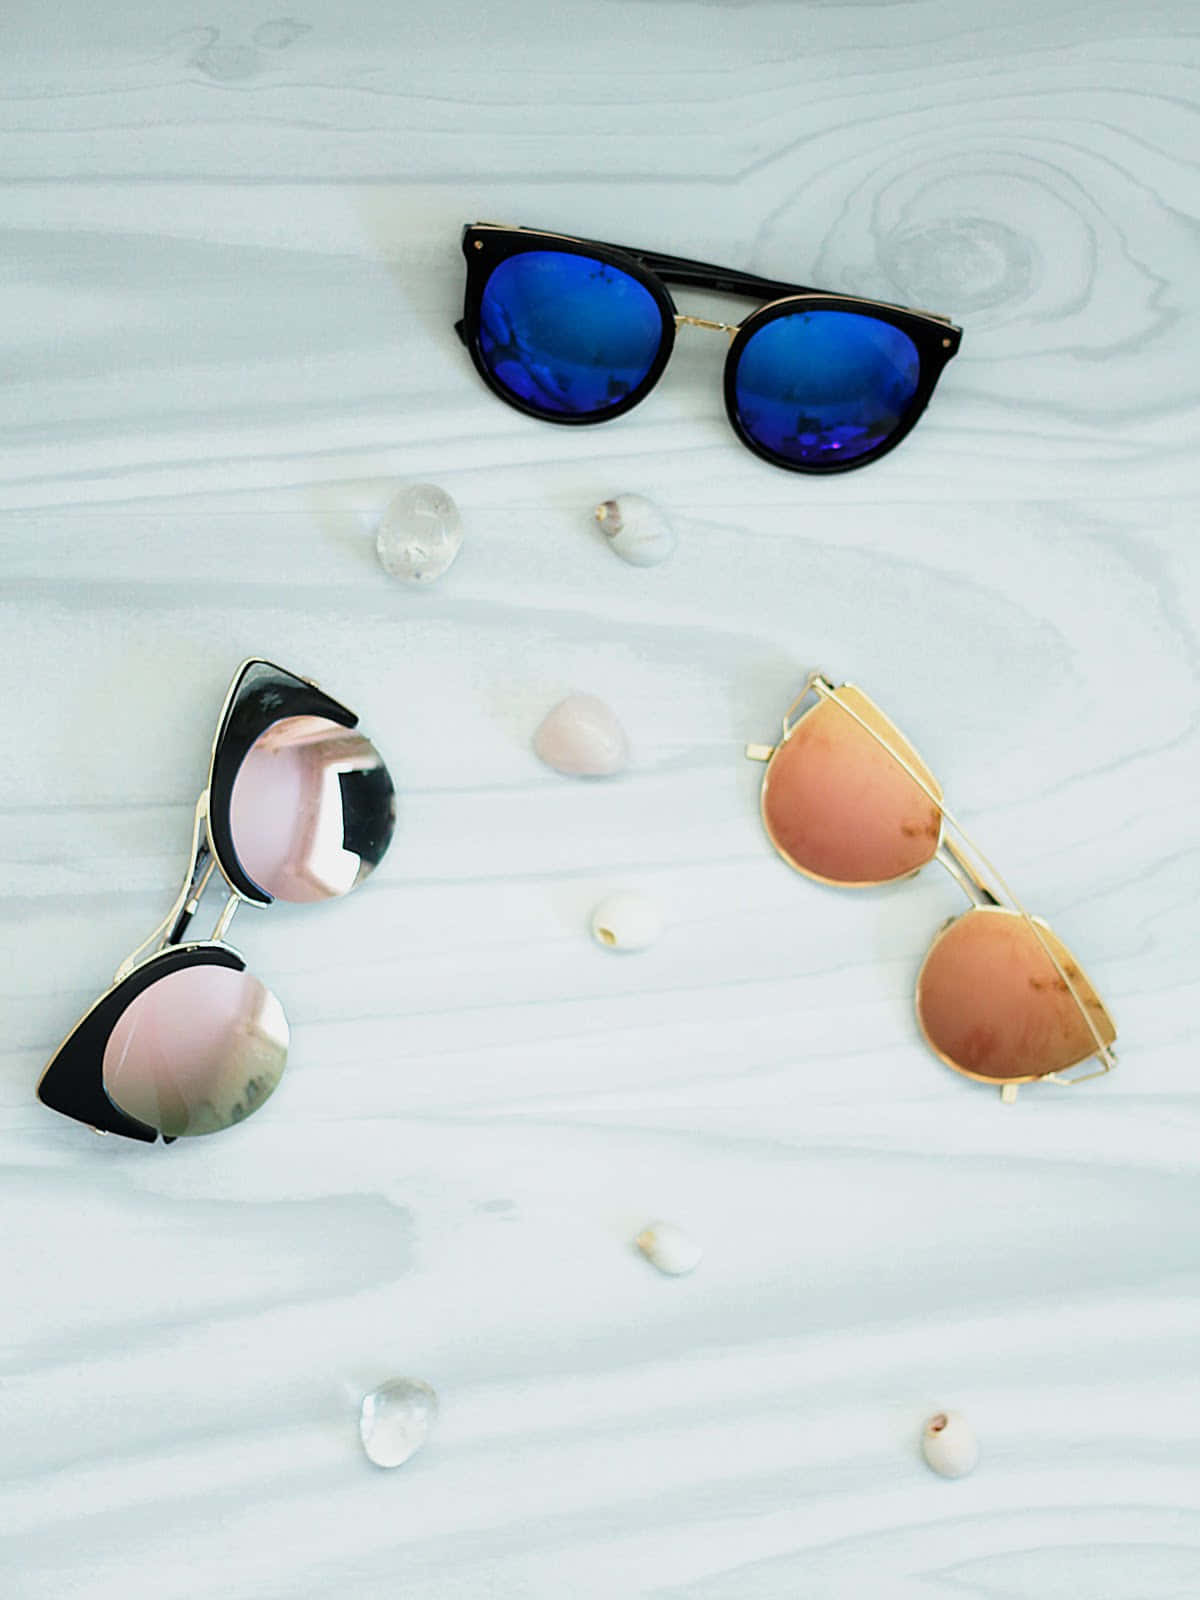 A Group Of Sunglasses On A White Surface